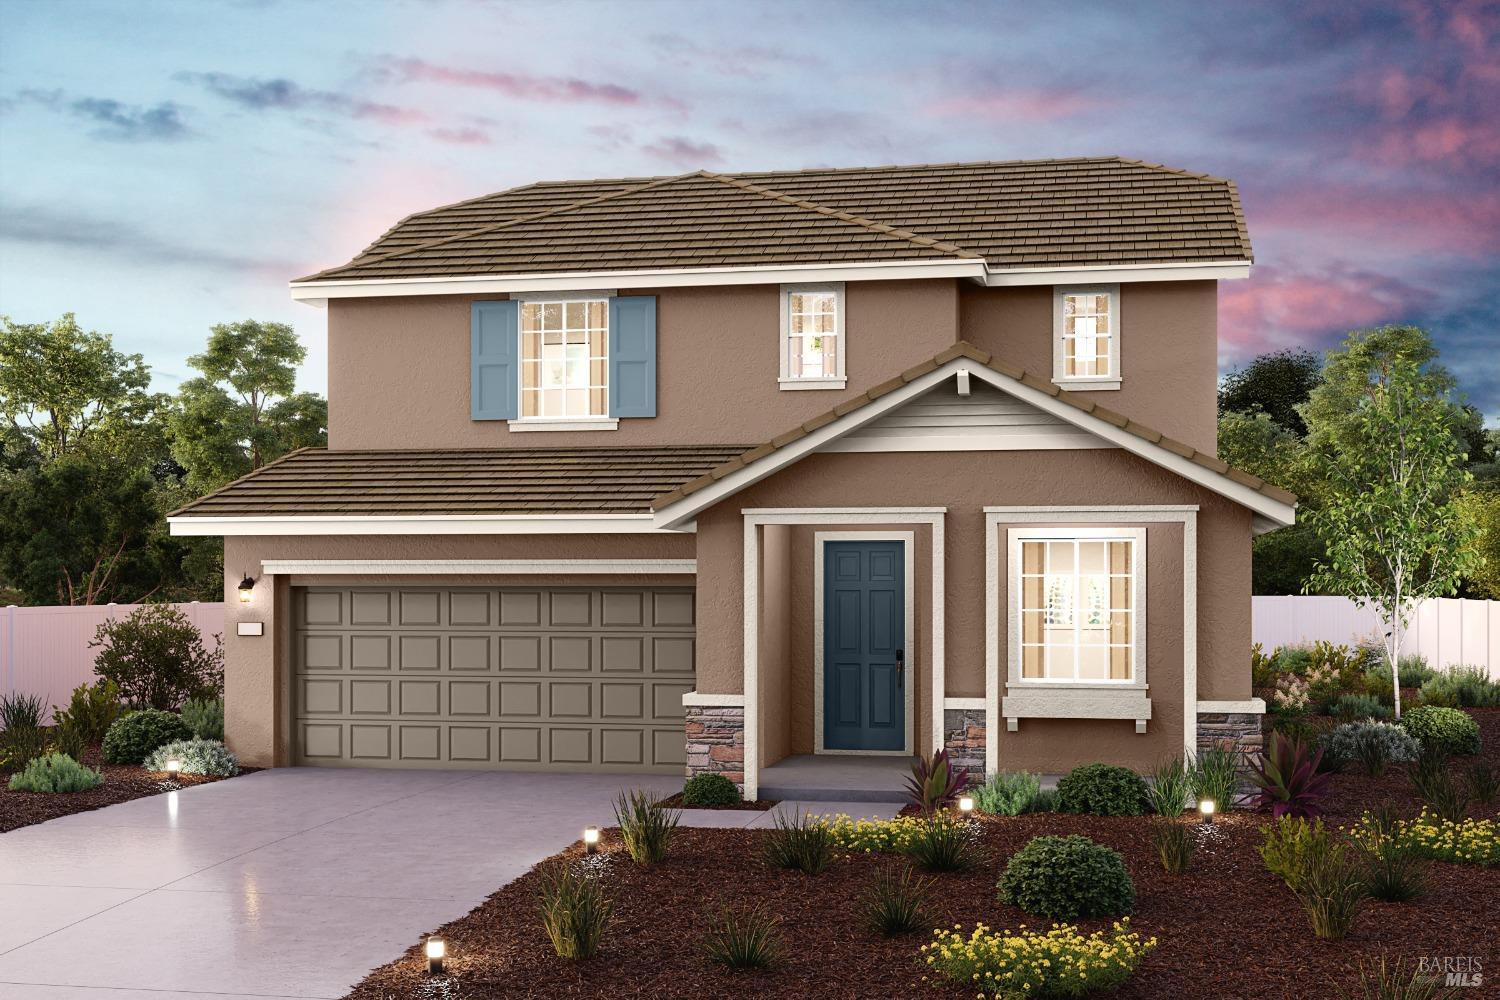 Welcome to Monte Verde, A New Home Community by Century Communities. This is a Two Story, West Facin